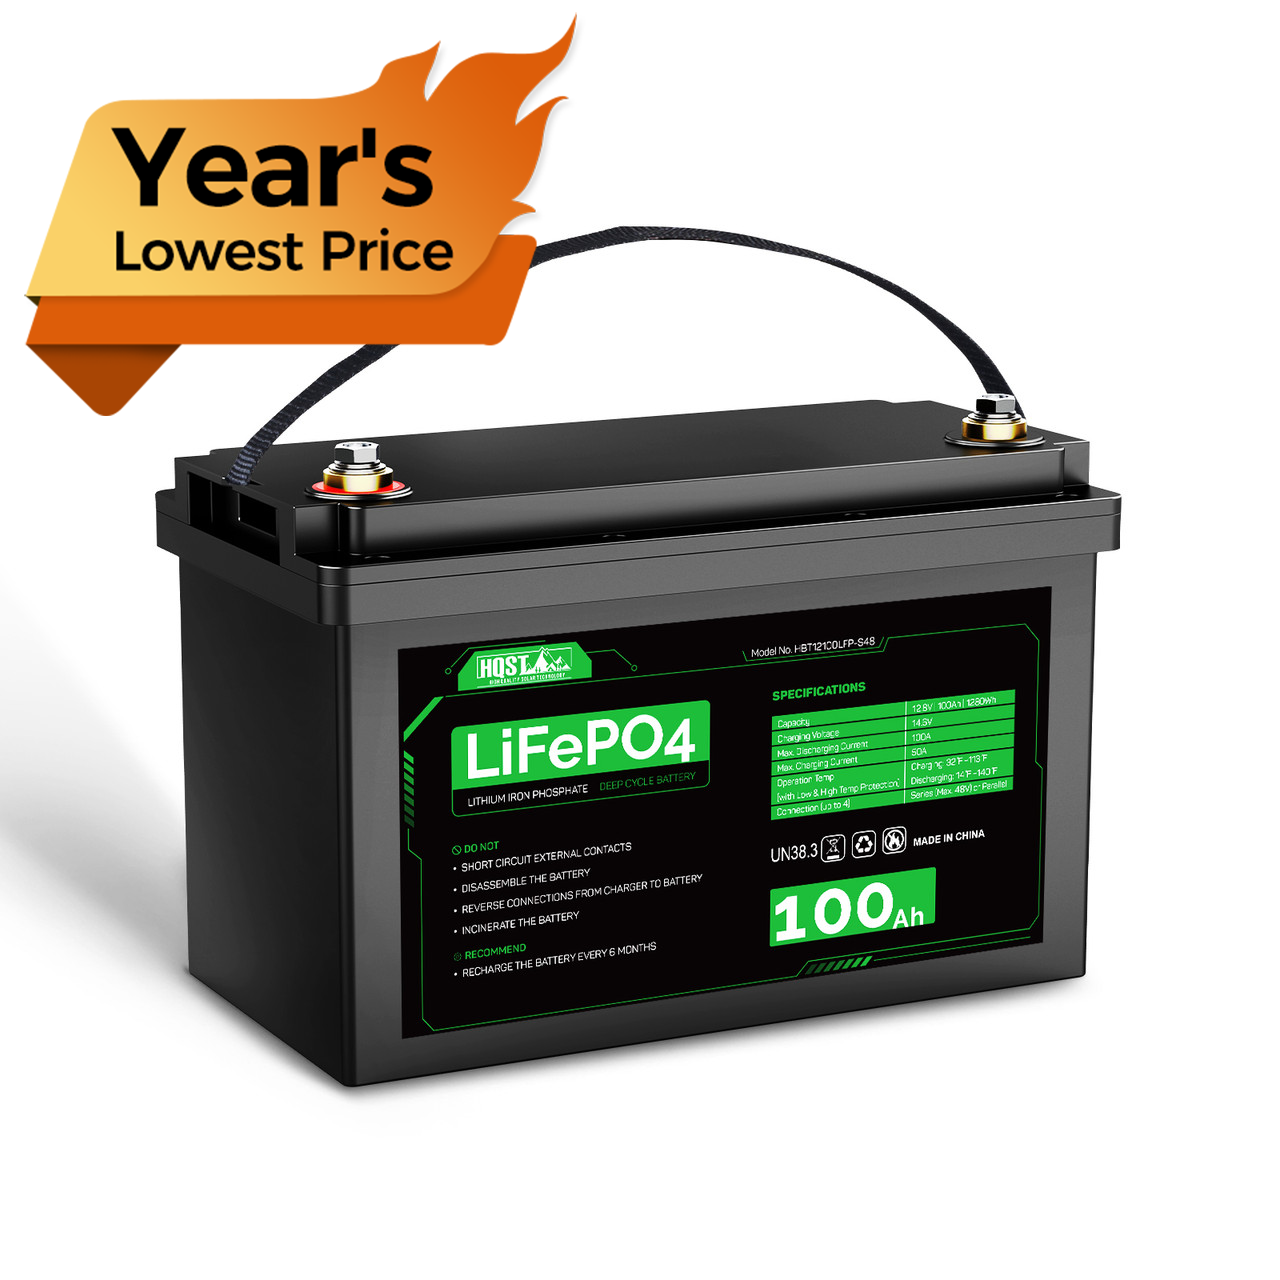 HQST 12 Volt 100Ah LiFePO4 Lithium Iron Phosphate Battery, Built-in  Optimized BMS with Low & High Temp Protection, Series and Parallel  Connection, for RVs, Boats, Solar System